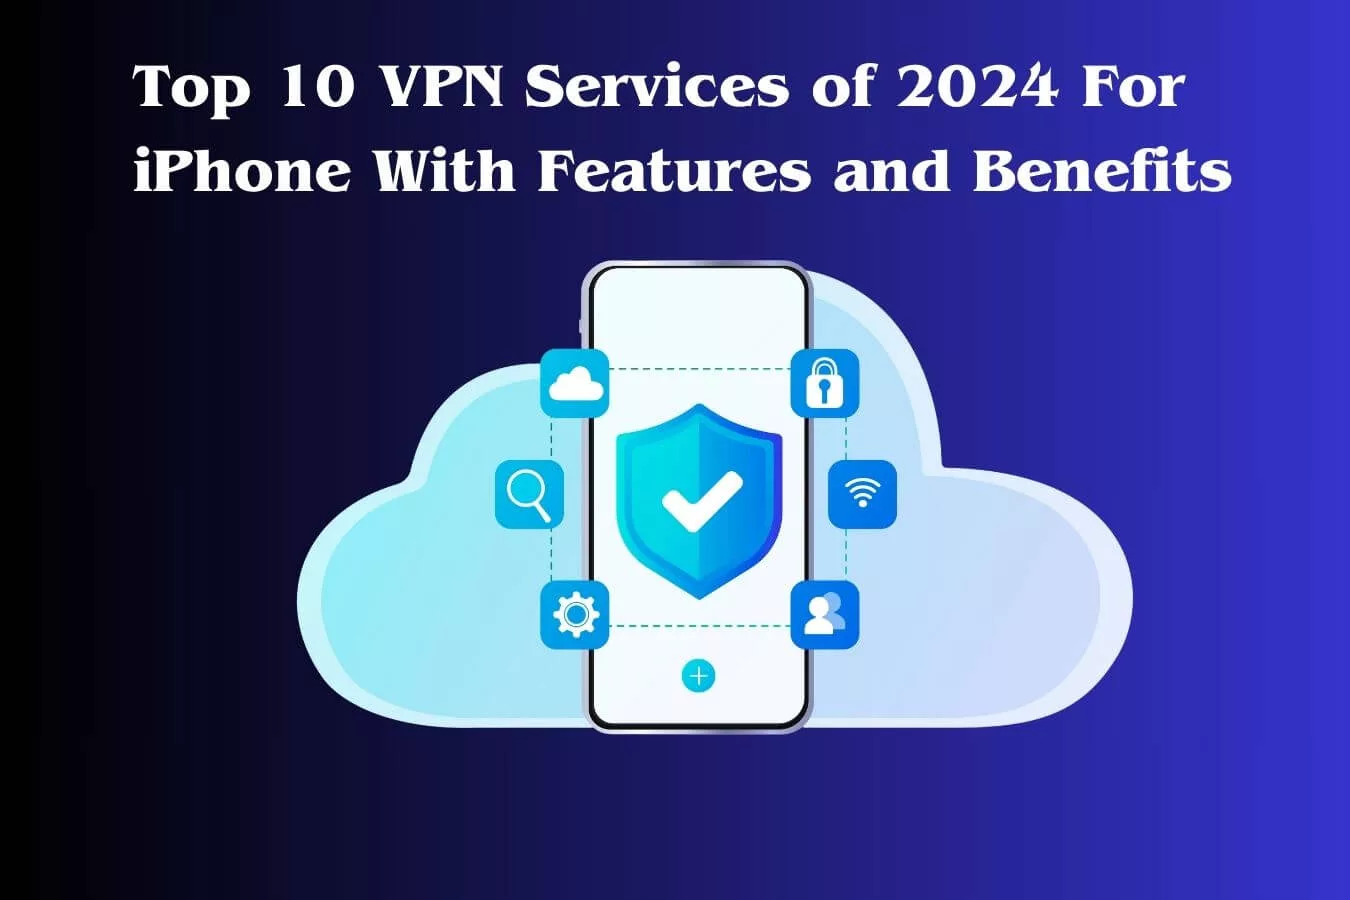 Top 10 VPN Services of 2024 For iPhone With Features and Benefits